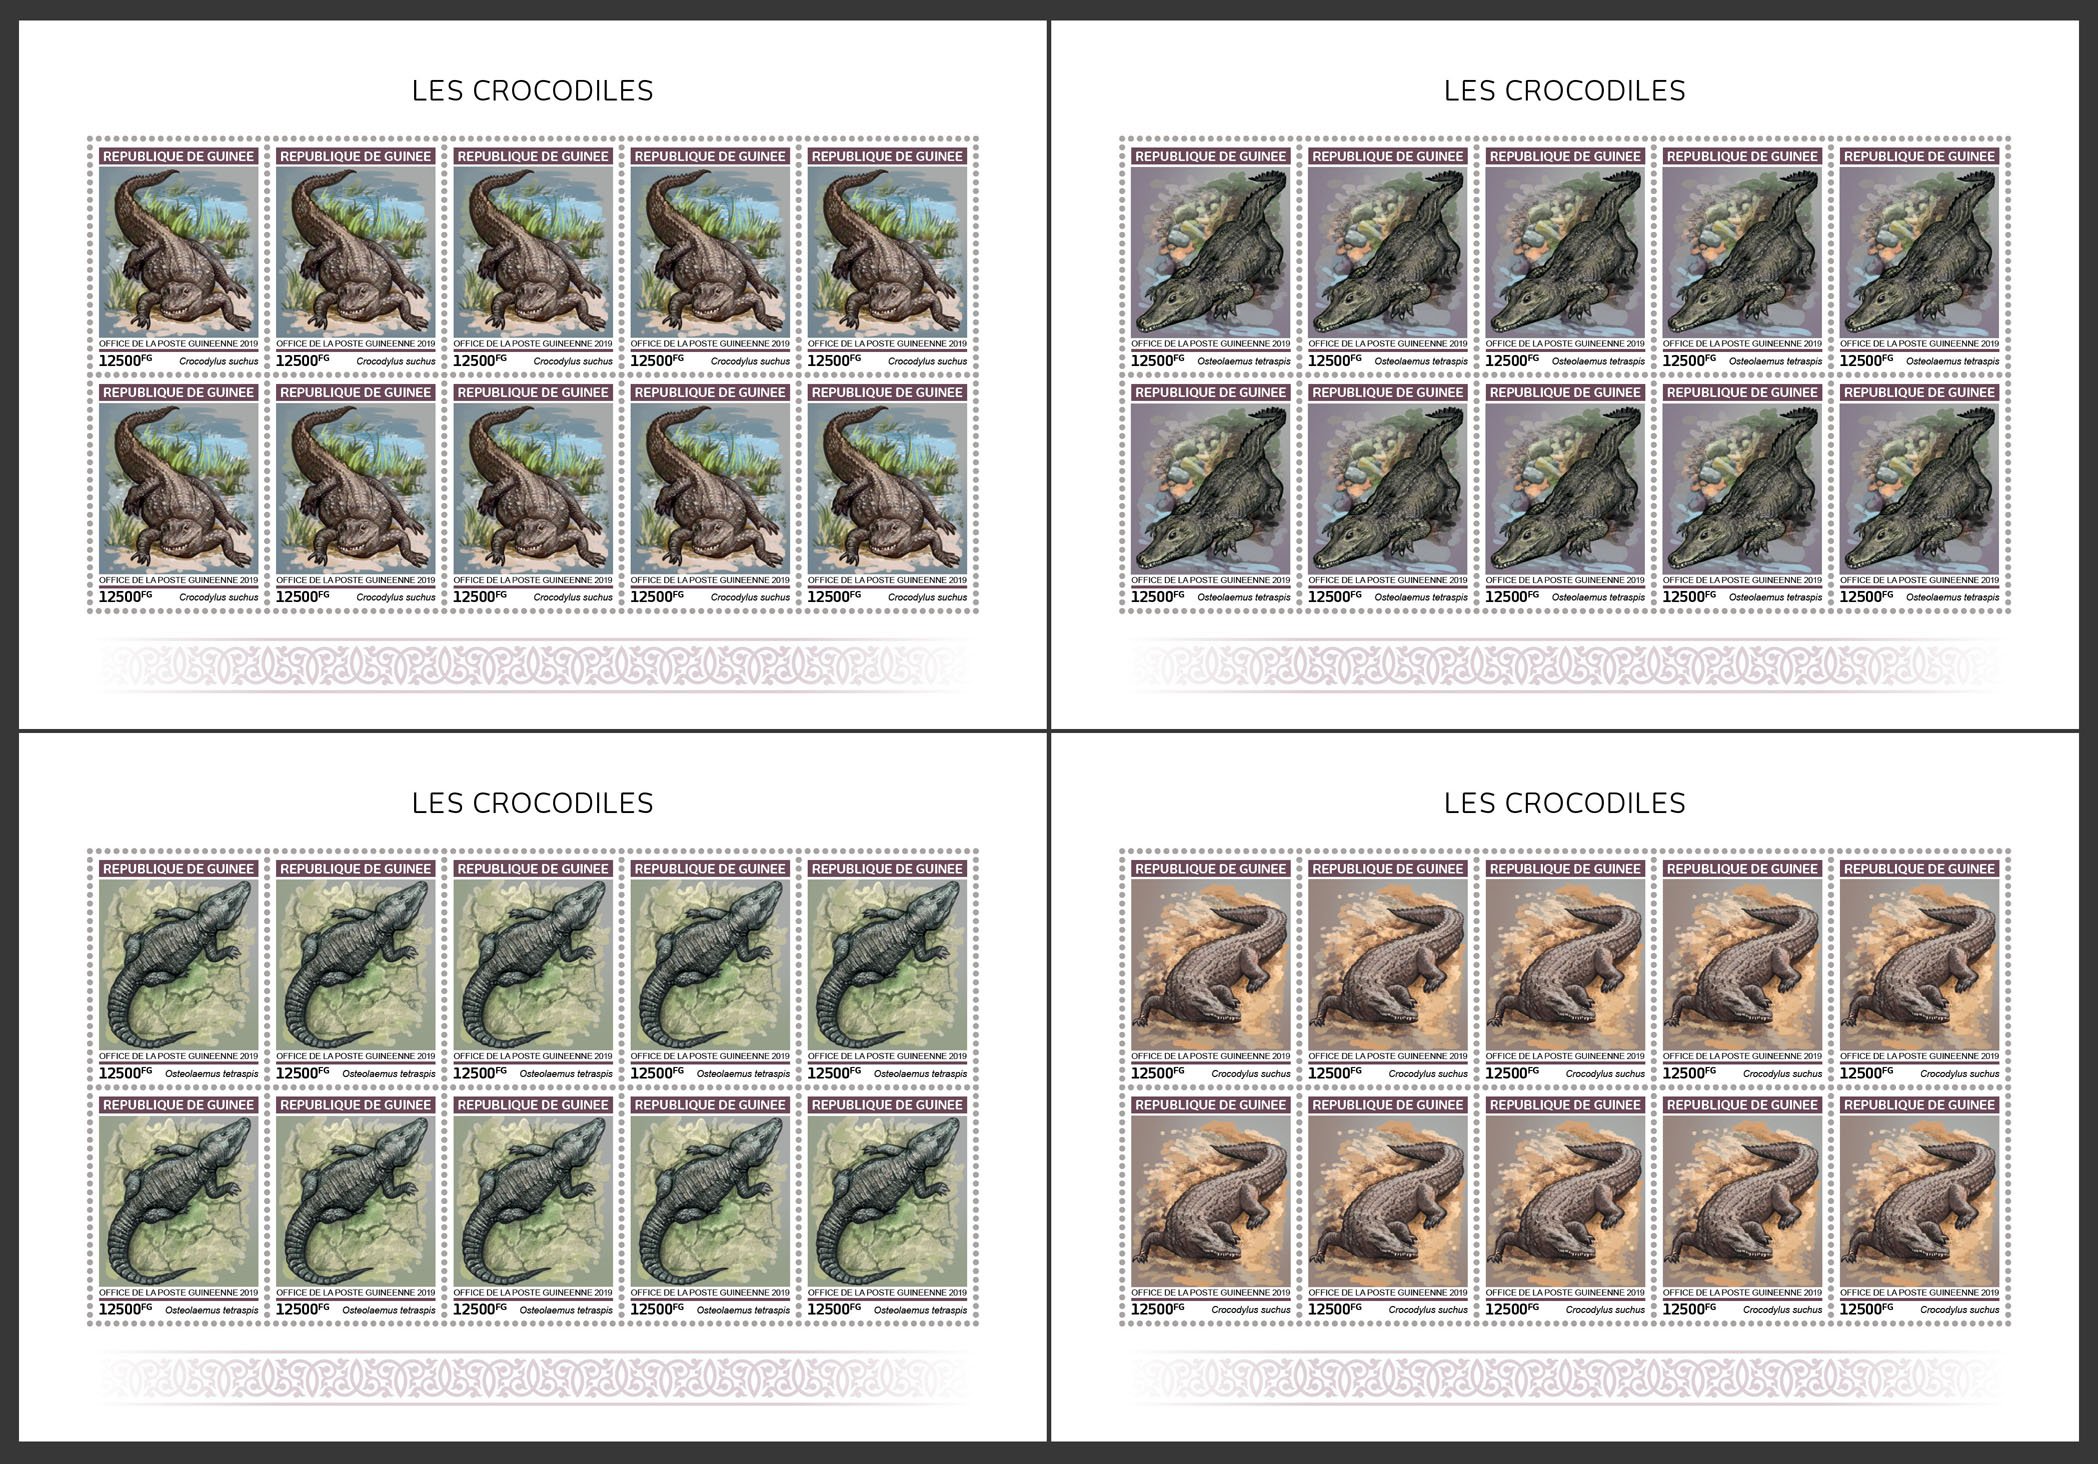 Crocodiles - Issue of Guinée postage stamps